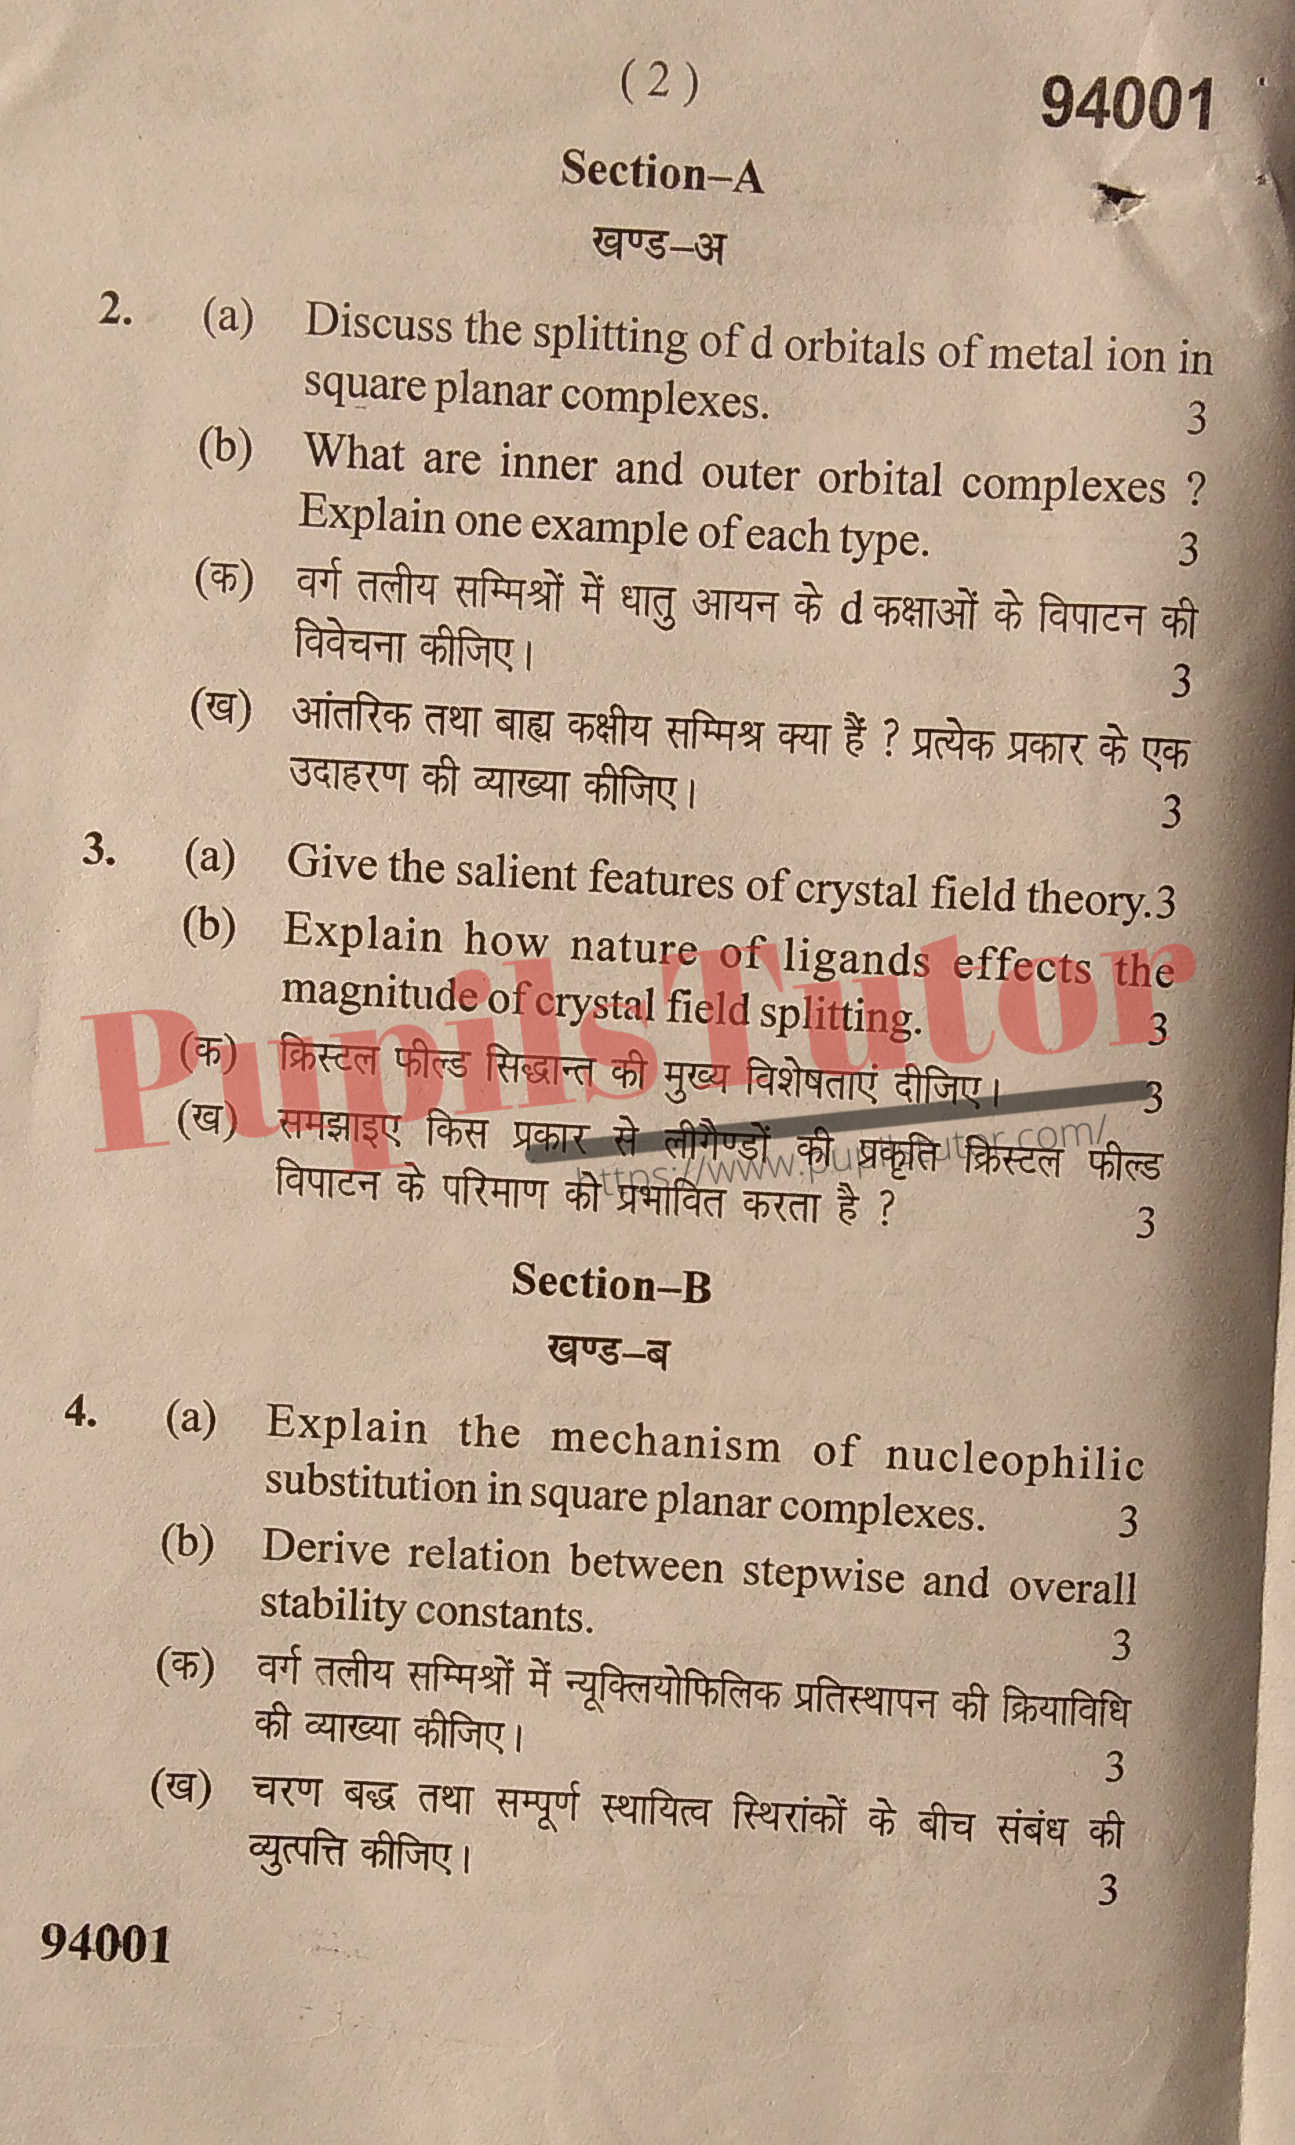 M.D. University B.Sc. [Chemistry] Inorganic Chemistry 5th Semester Important Question Answer And Solution - www.pupilstutor.com (Paper Page Number 2)